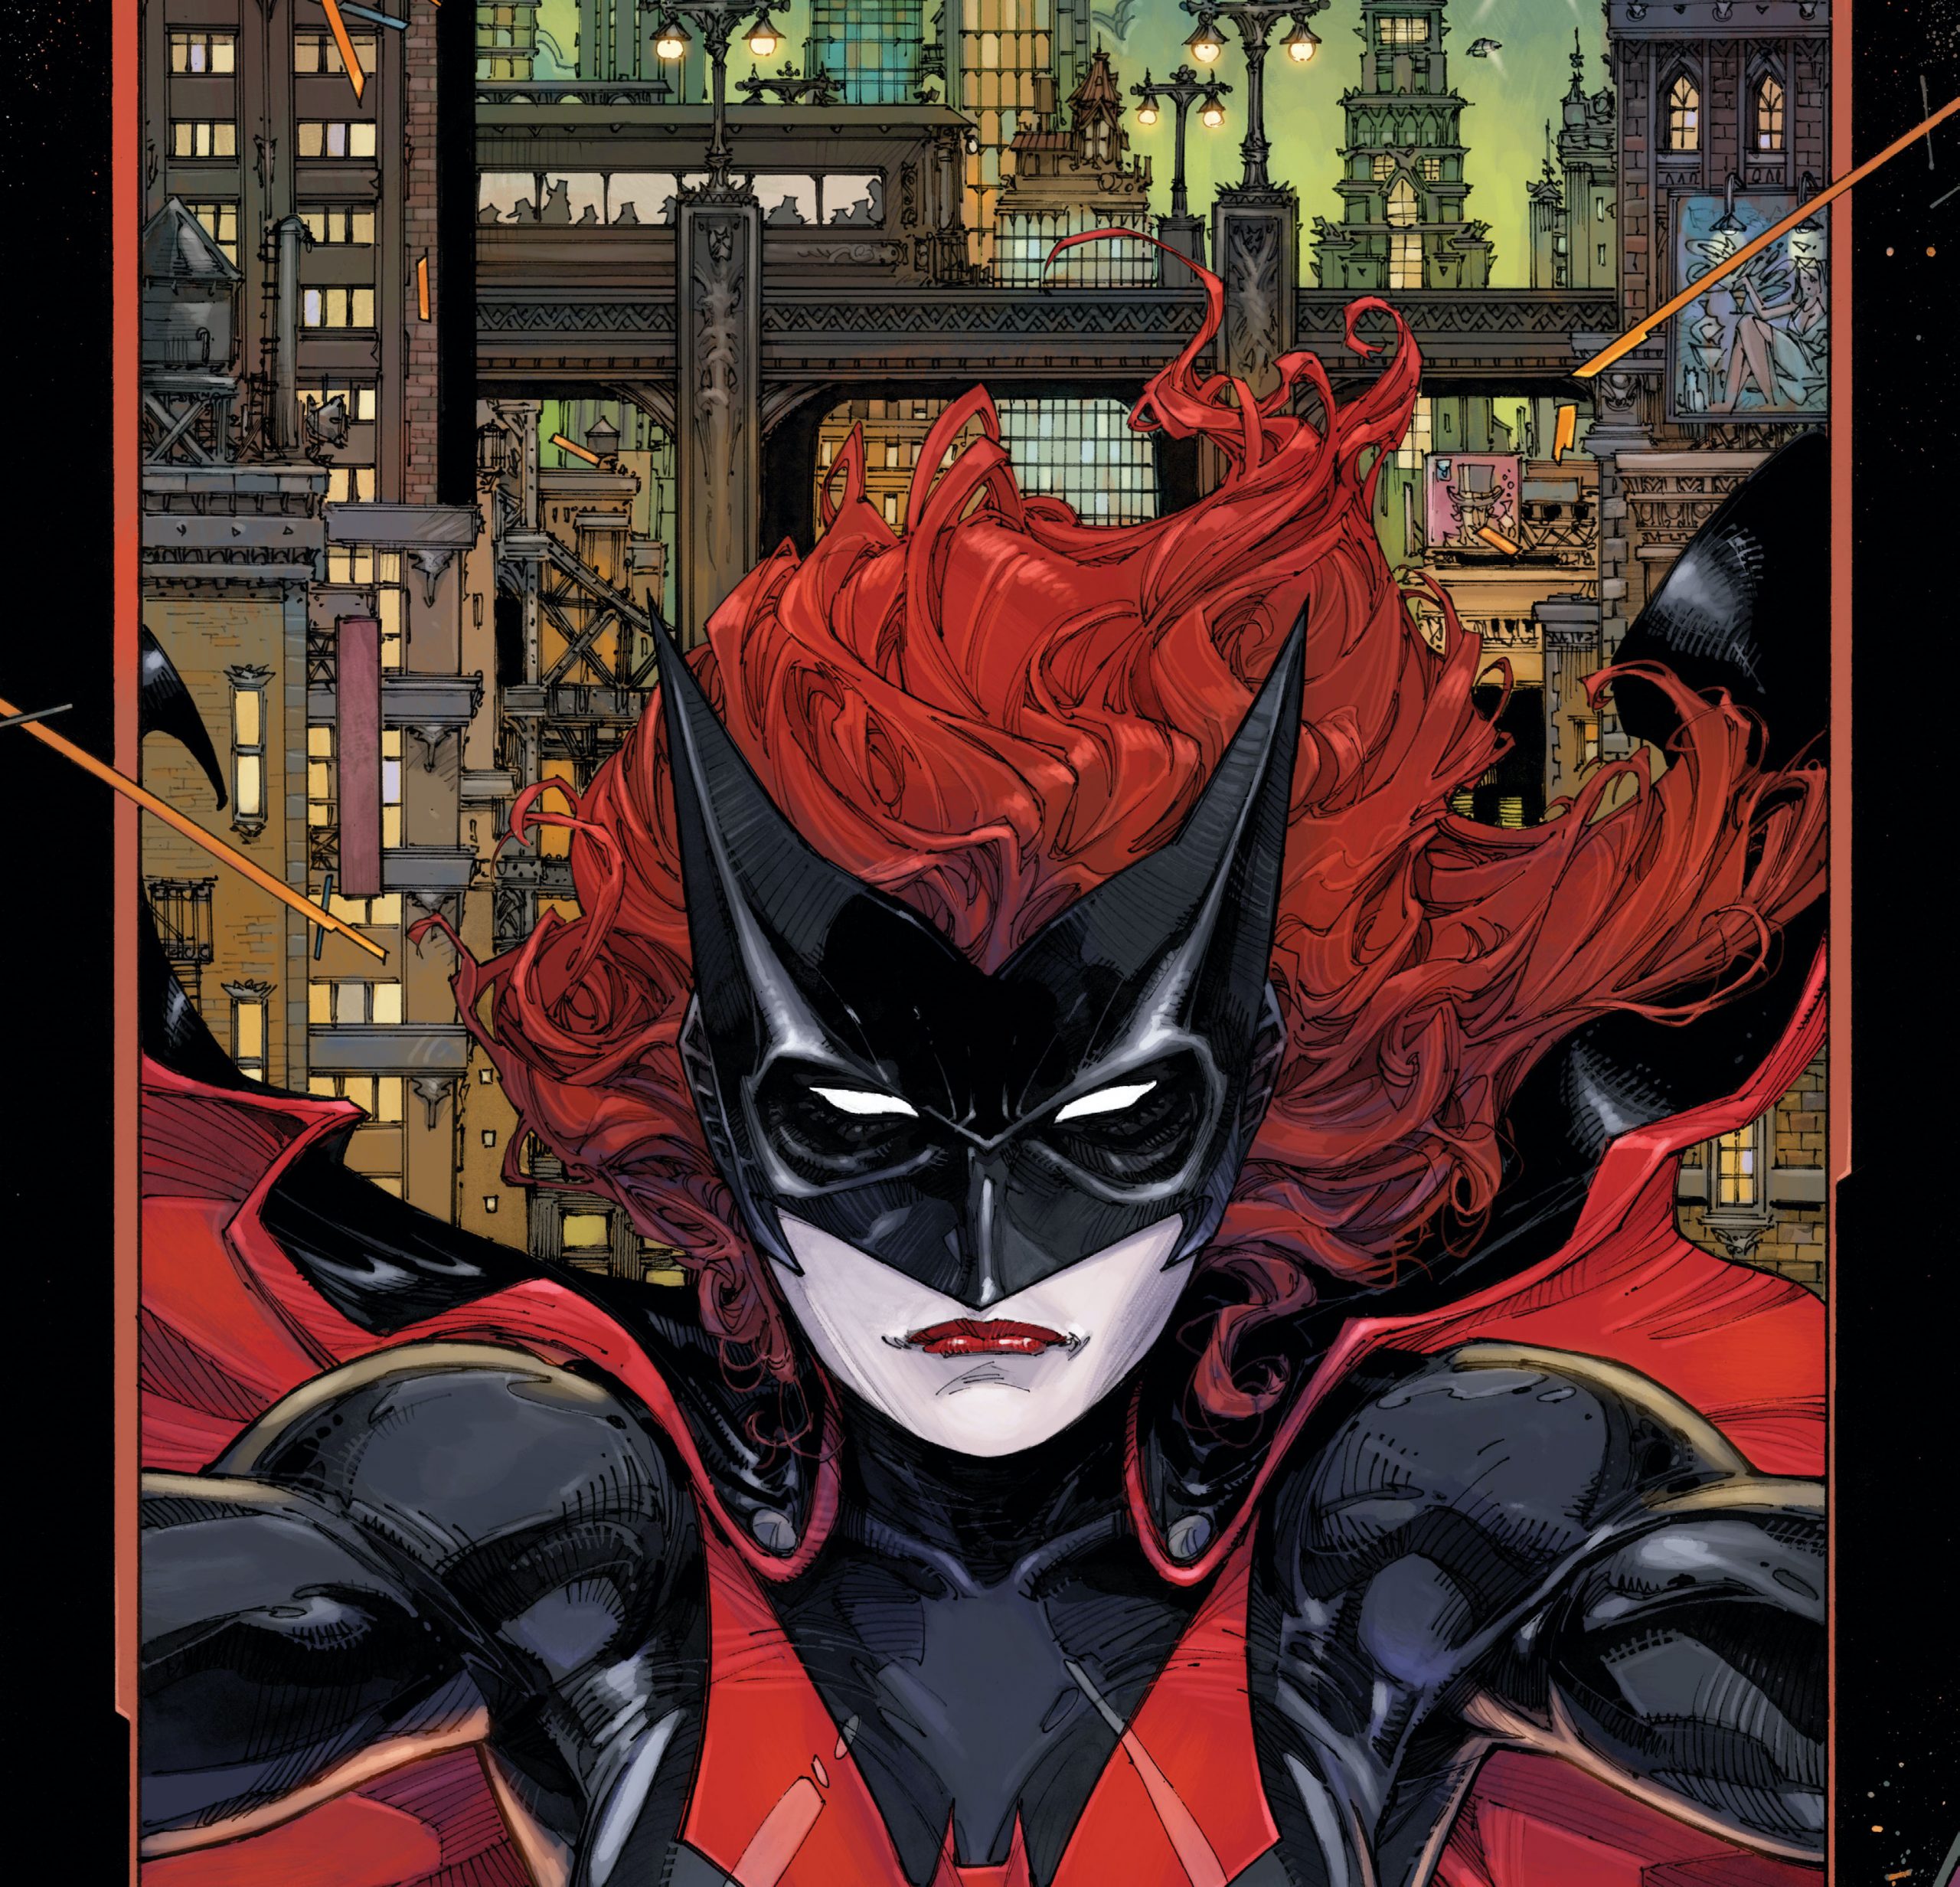 DC First Look: Detective Comics #1025 - Enter Batwoman! Out August 11